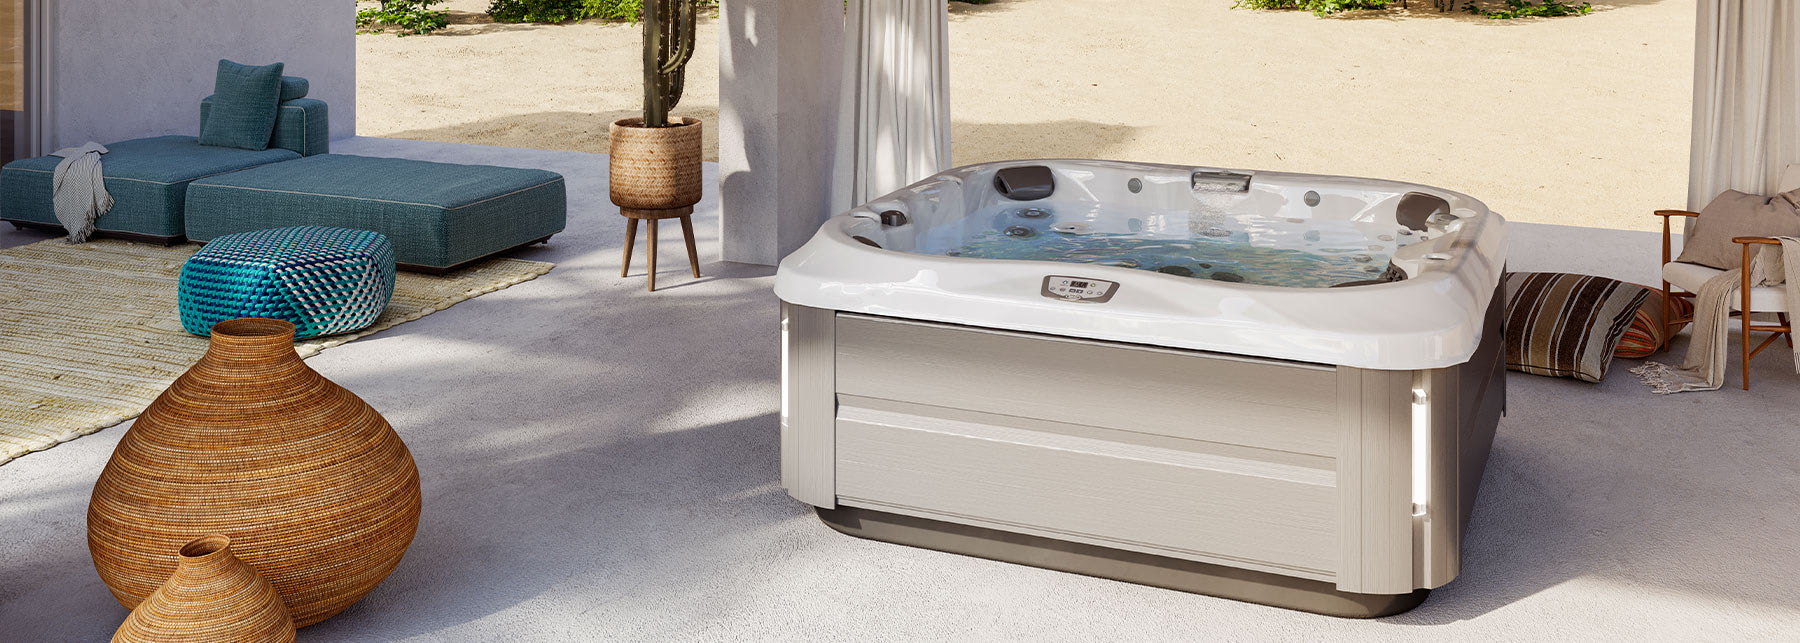 Health Benefits of Jacuzzi® Hot Tubs